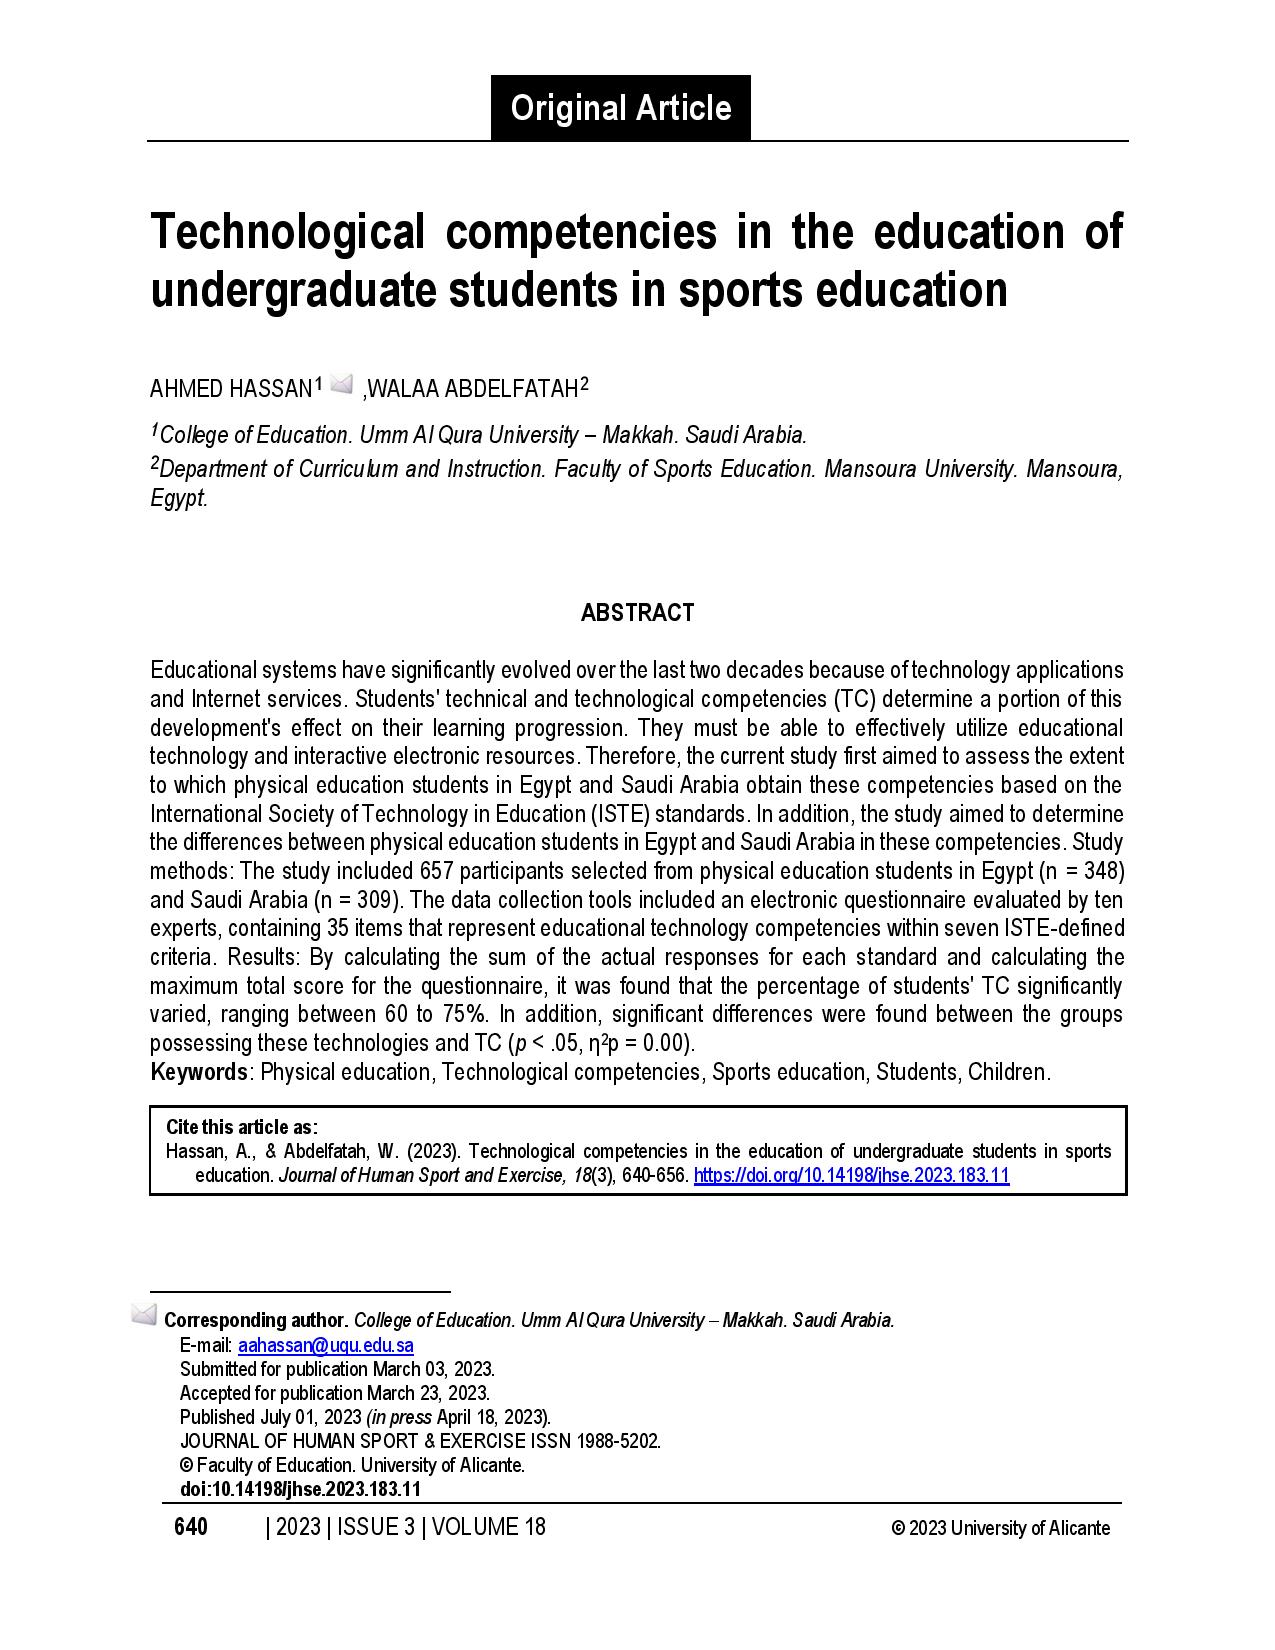 Technological competencies in the education of undergraduate students in sports education